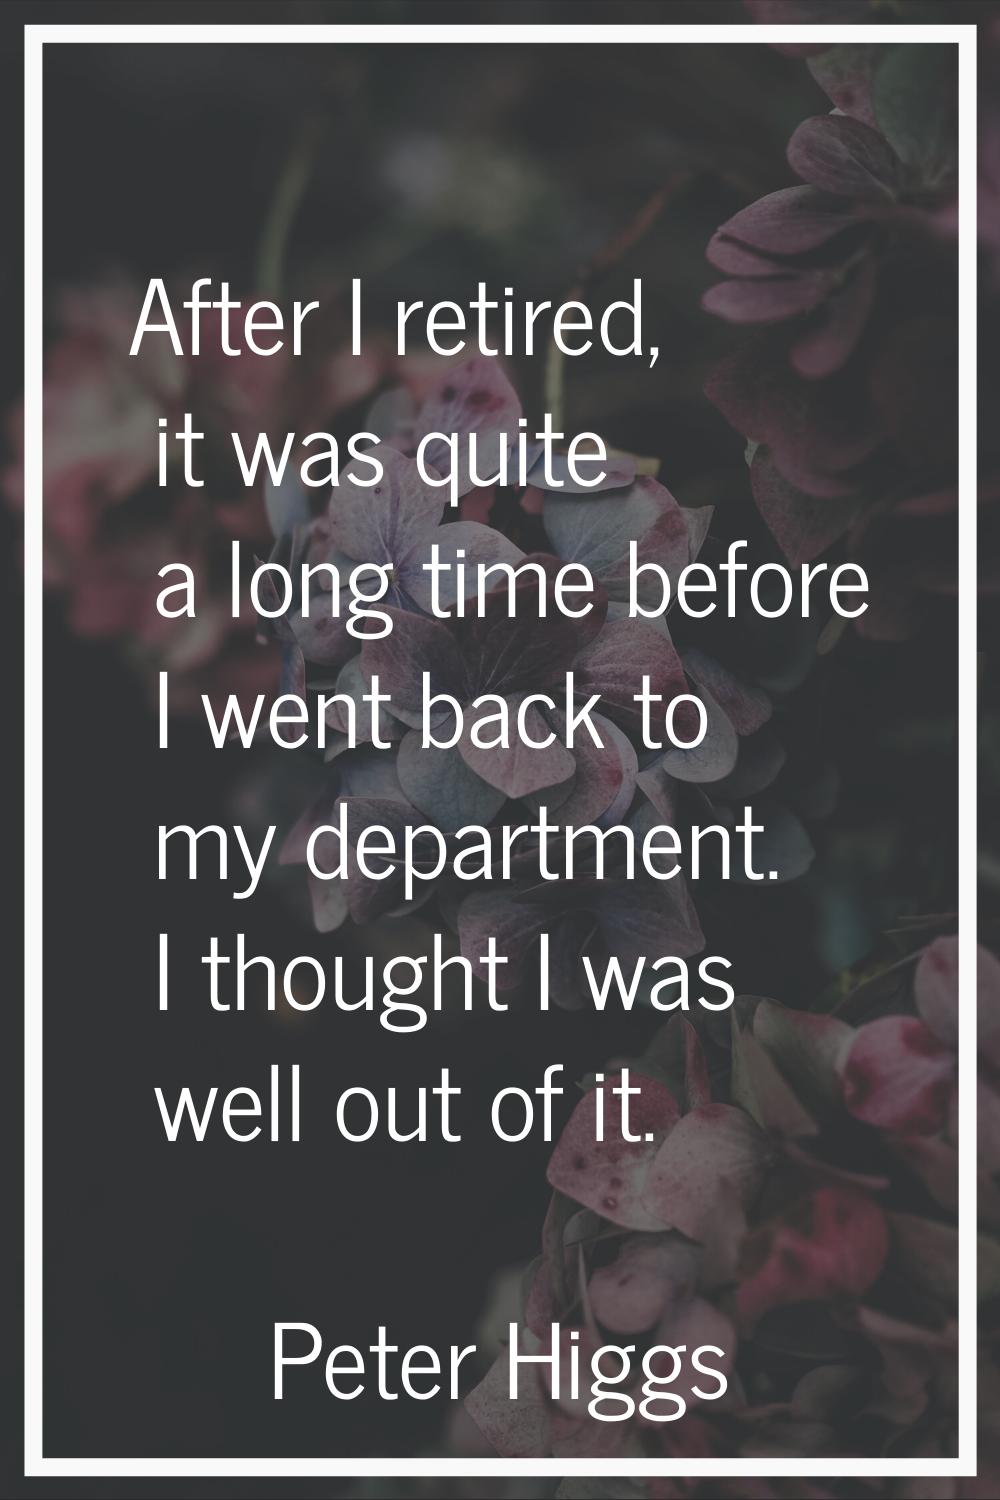 After I retired, it was quite a long time before I went back to my department. I thought I was well